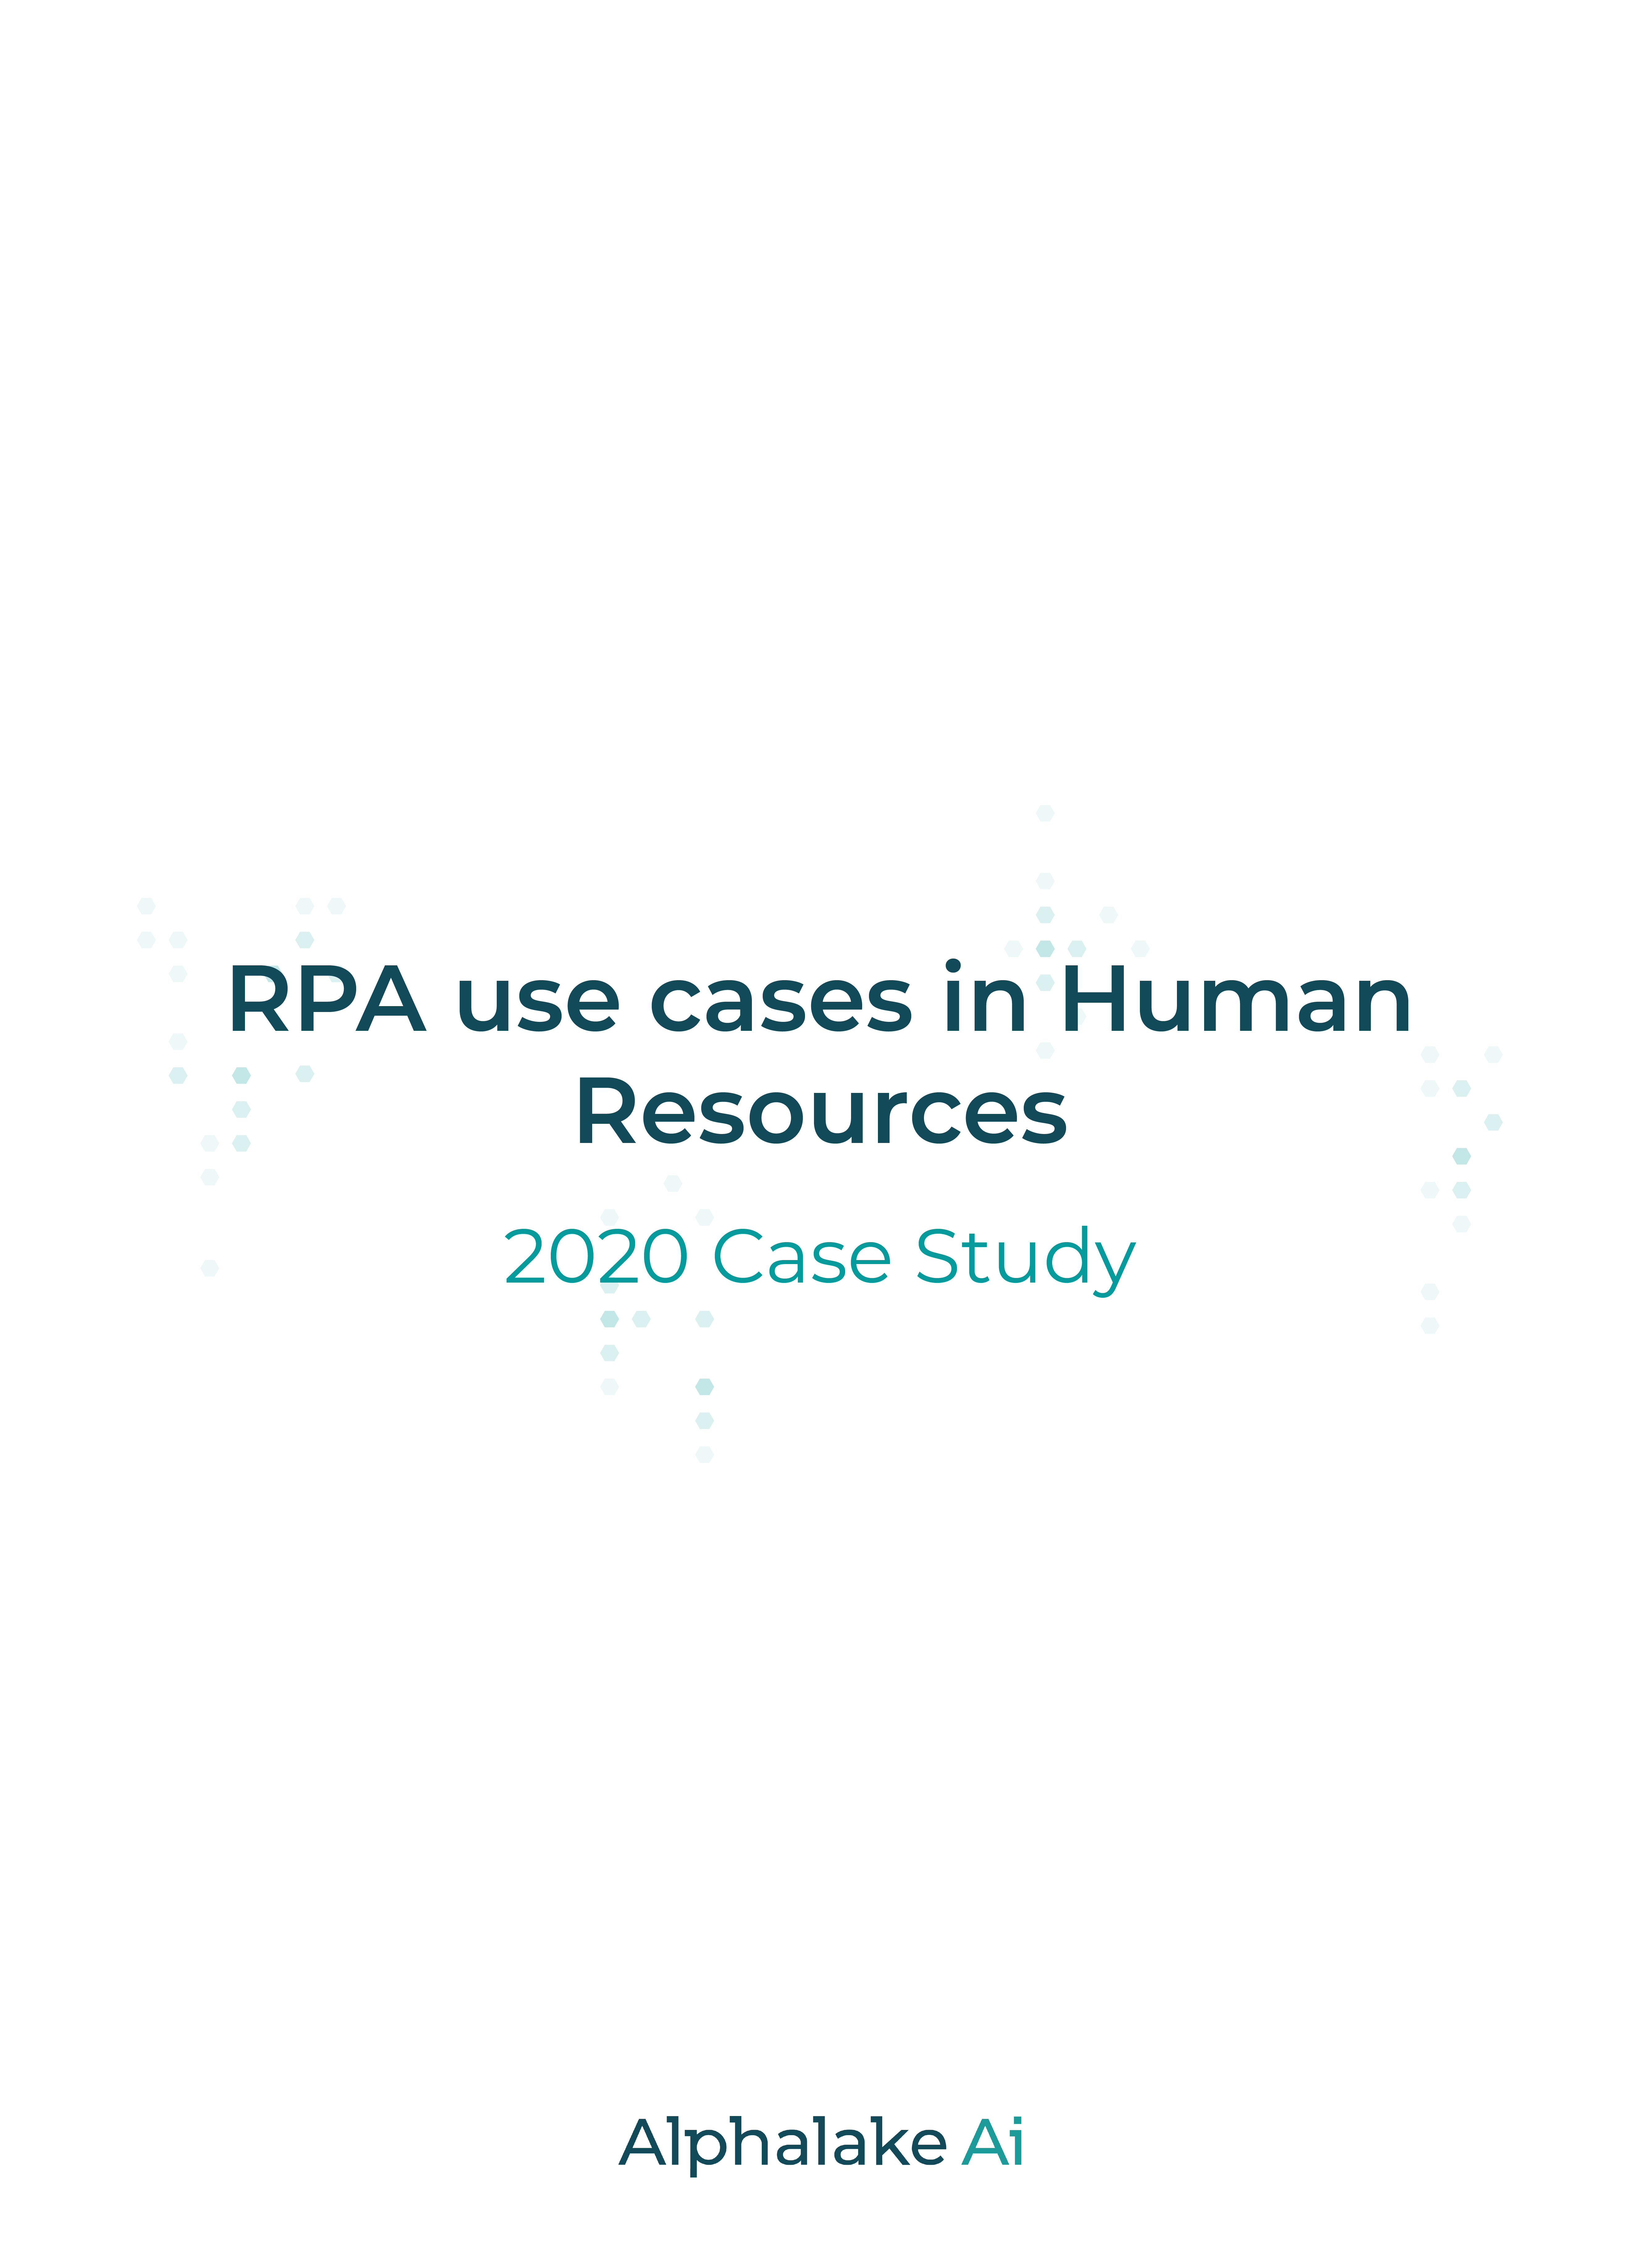 RPA Use Cases in Human Resources